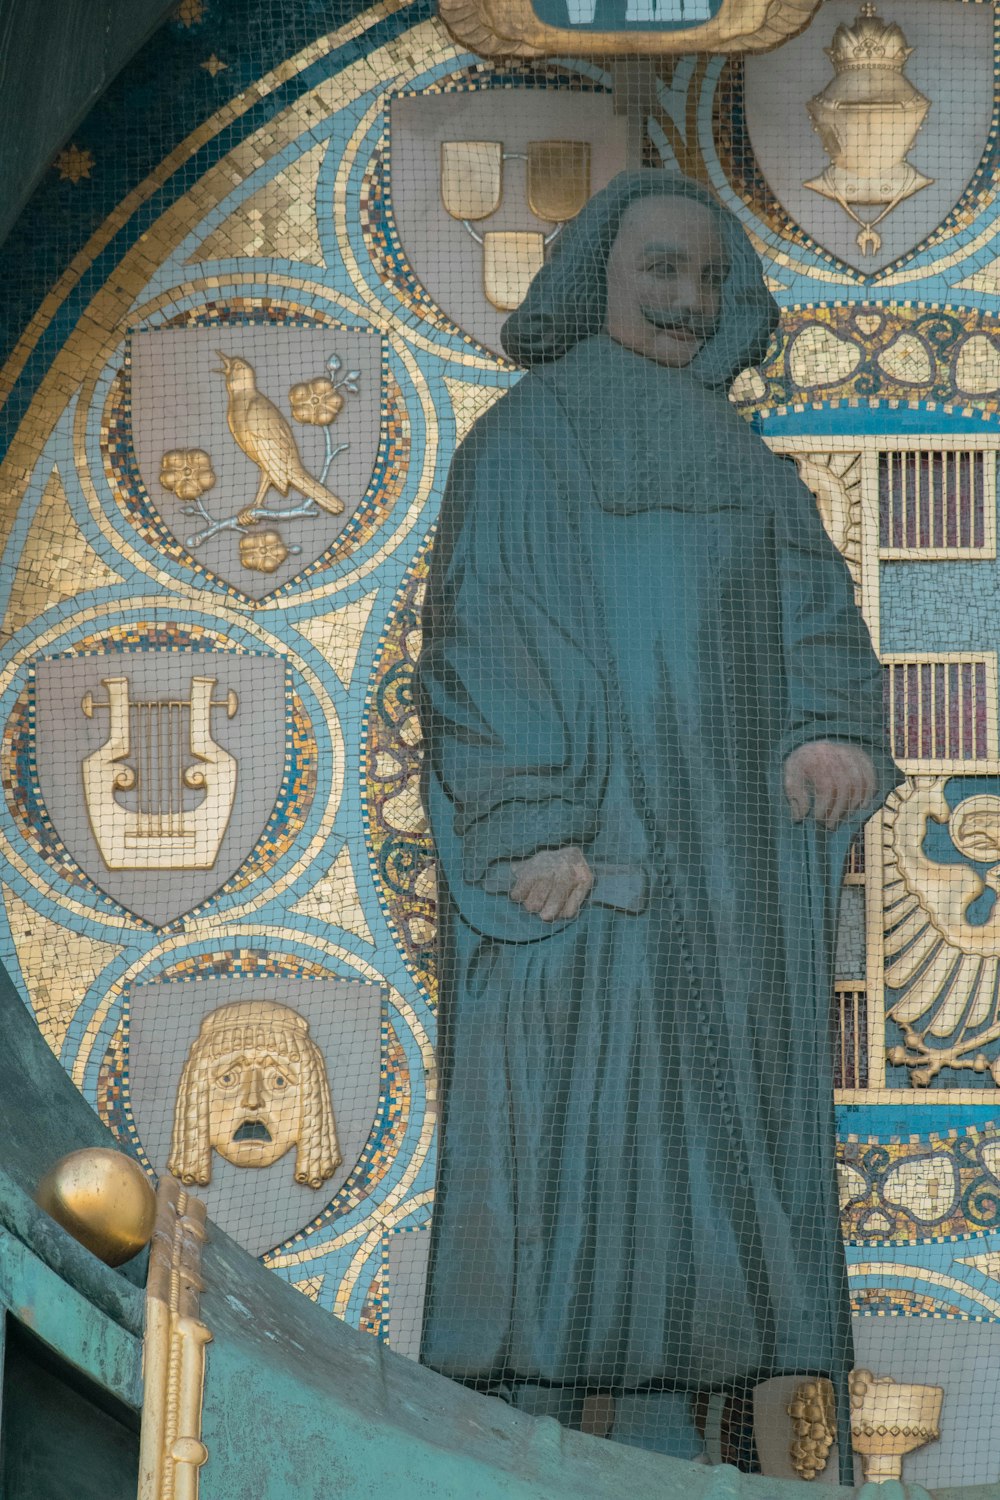 a statue of a person standing in front of a stained glass window